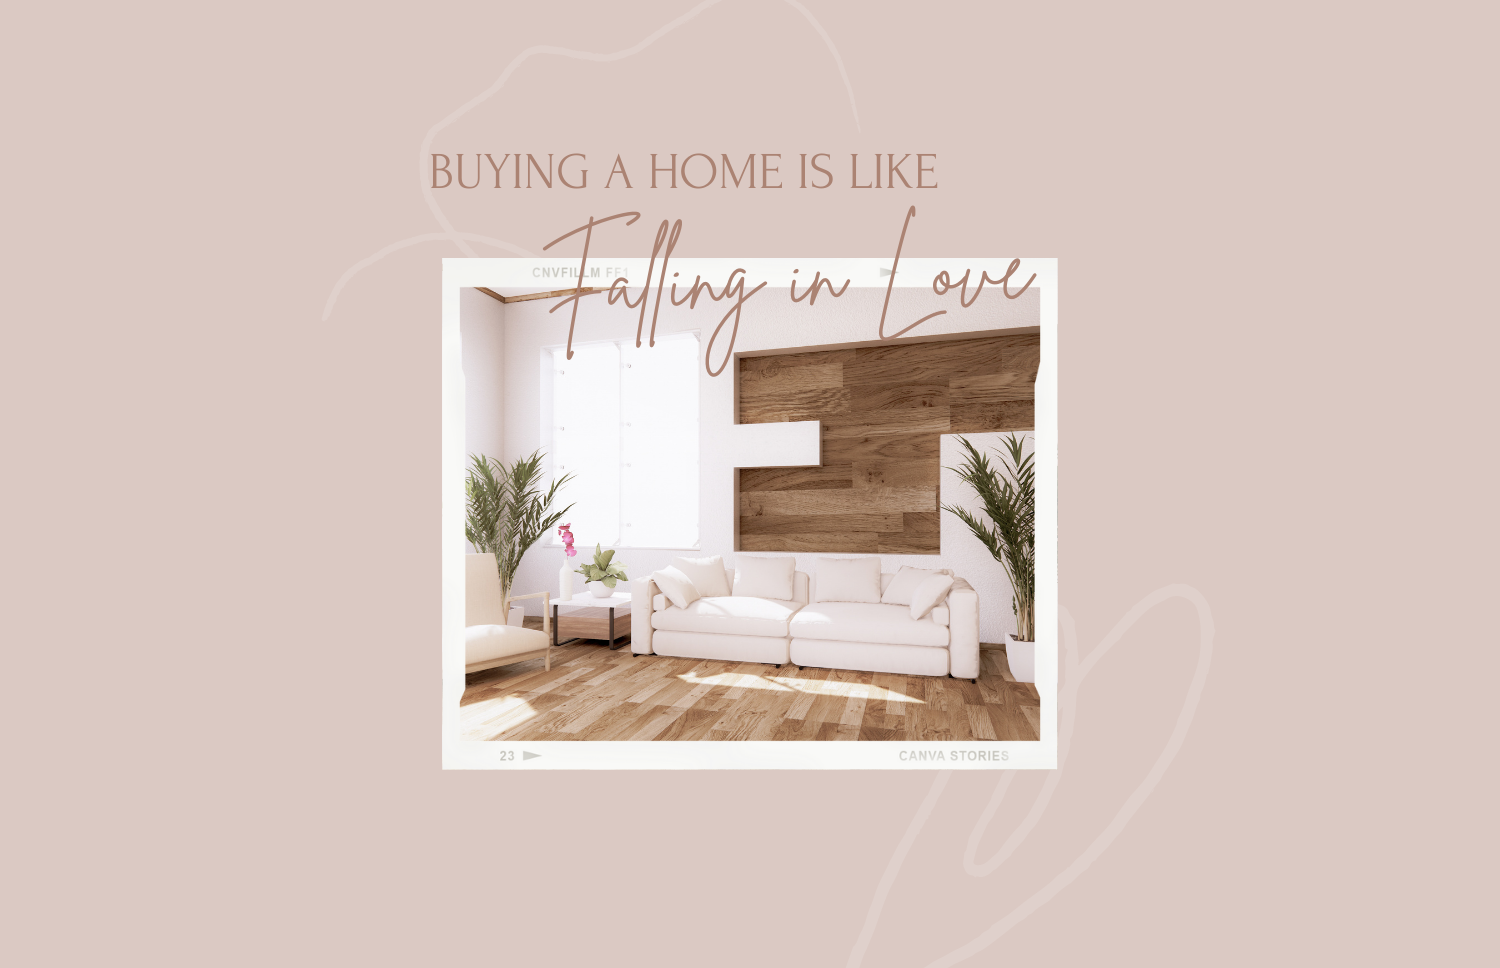 Buying a Home is like falling in love